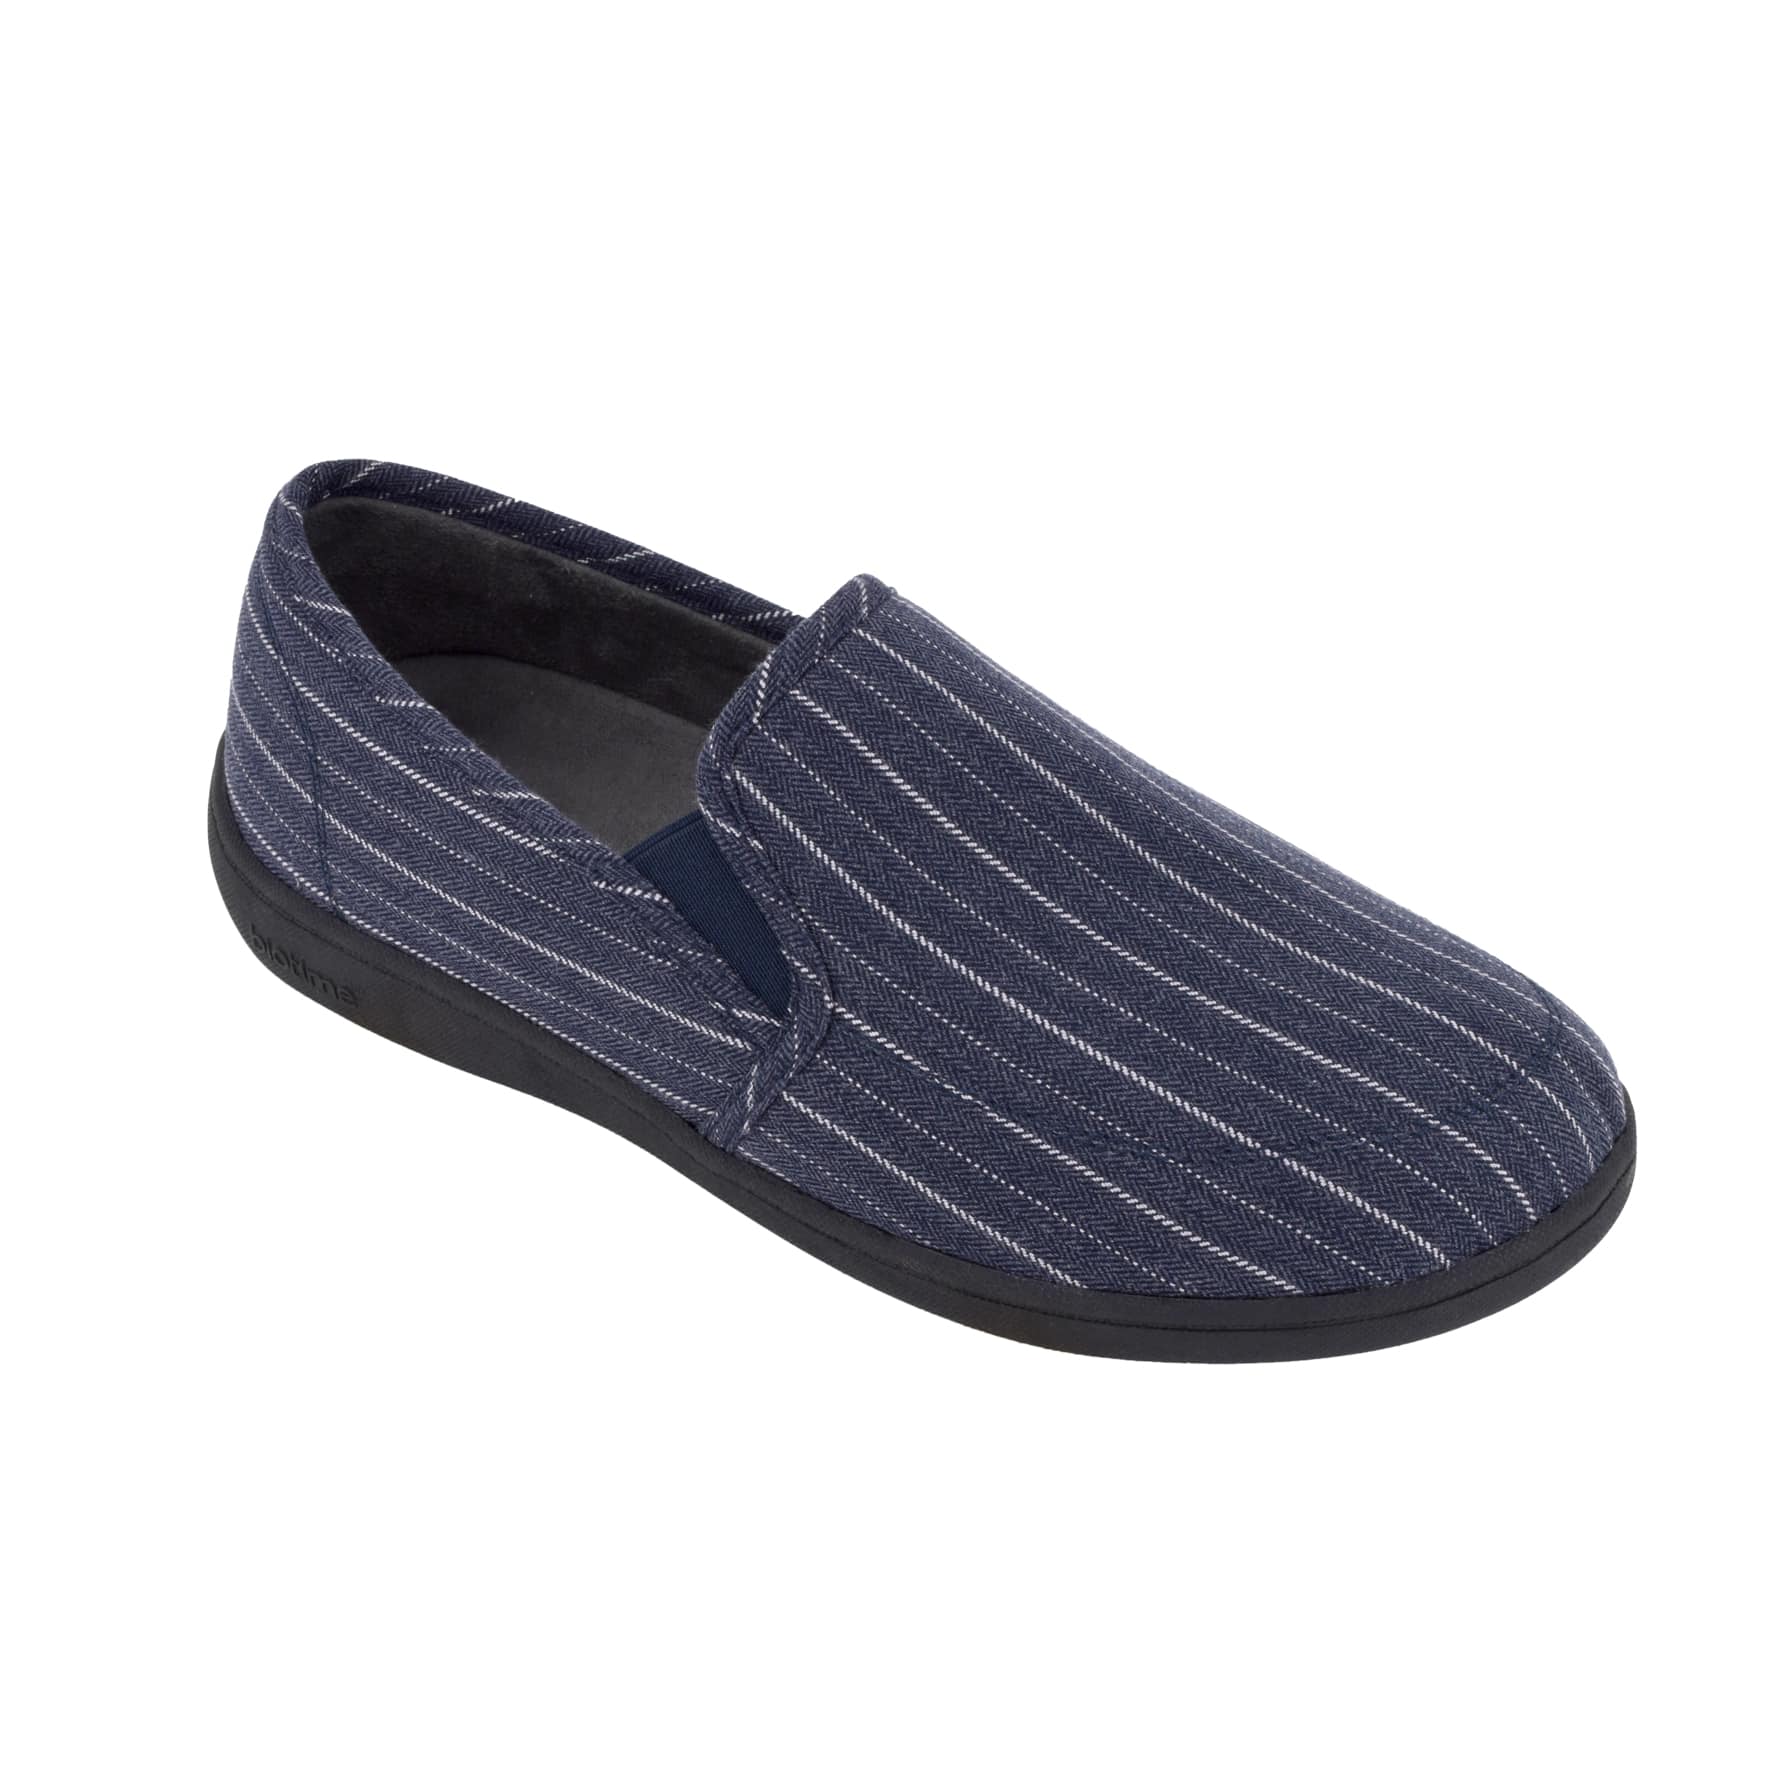 Biotime Men's Alfred Slippers with contoured removable insole